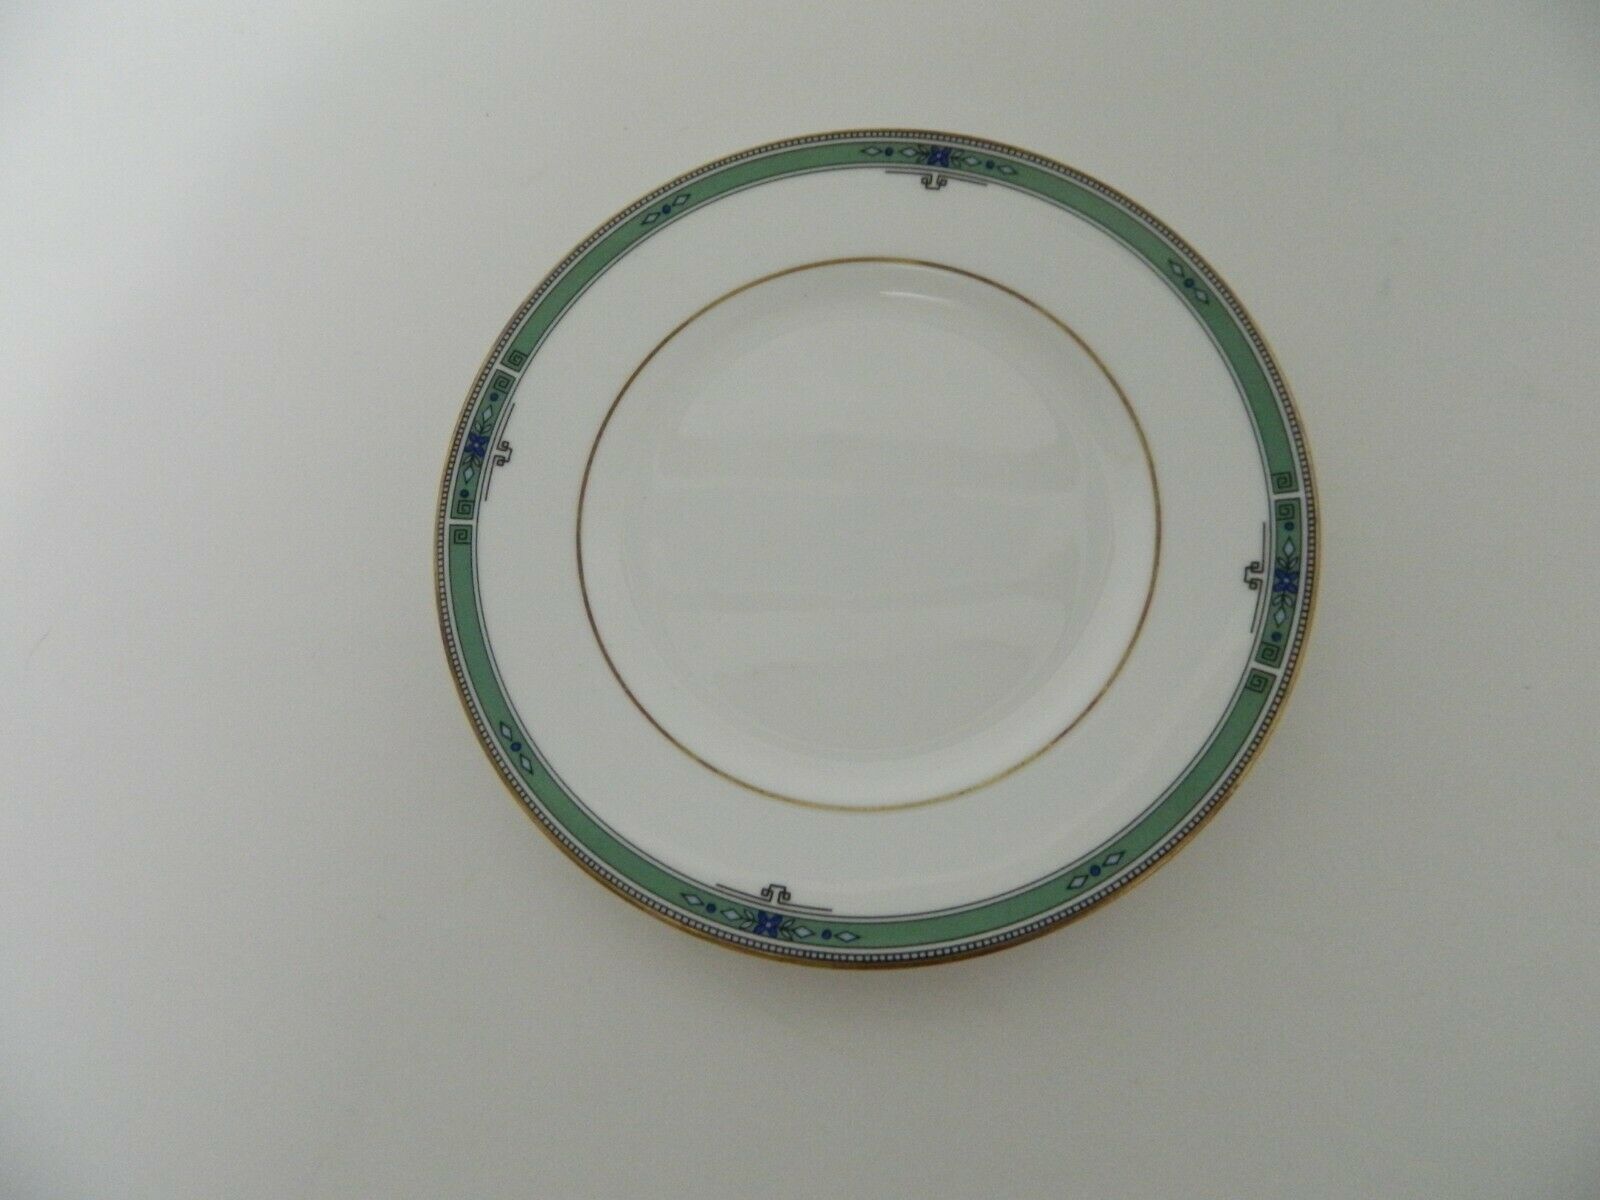 White 6 5C110905103 6 Wedgwood Radiante Bread & Butter Plate